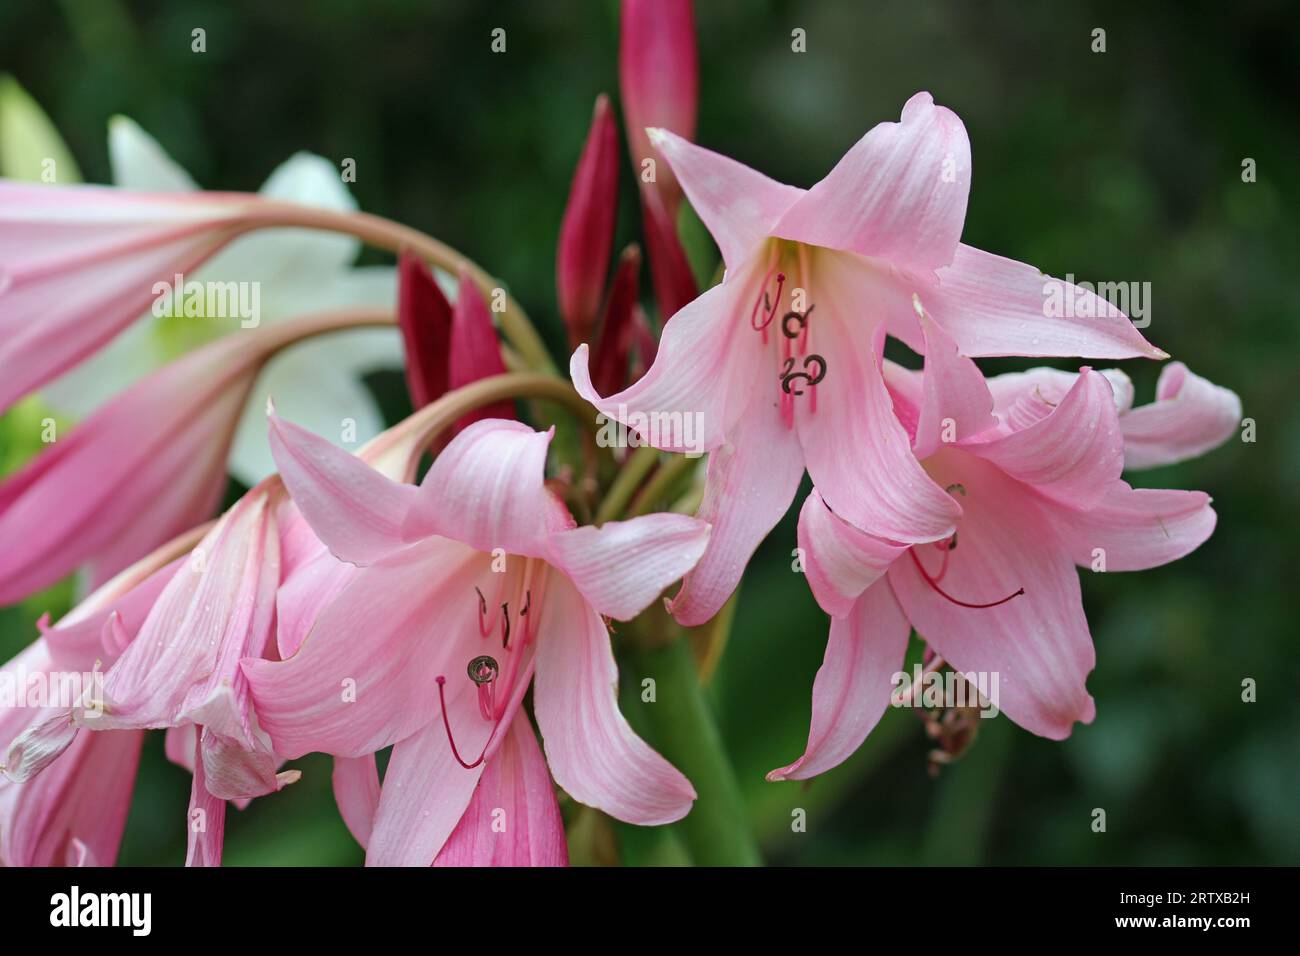 Pink powell hybrid swamp lily, Crinum x powellii, flower in close up ...